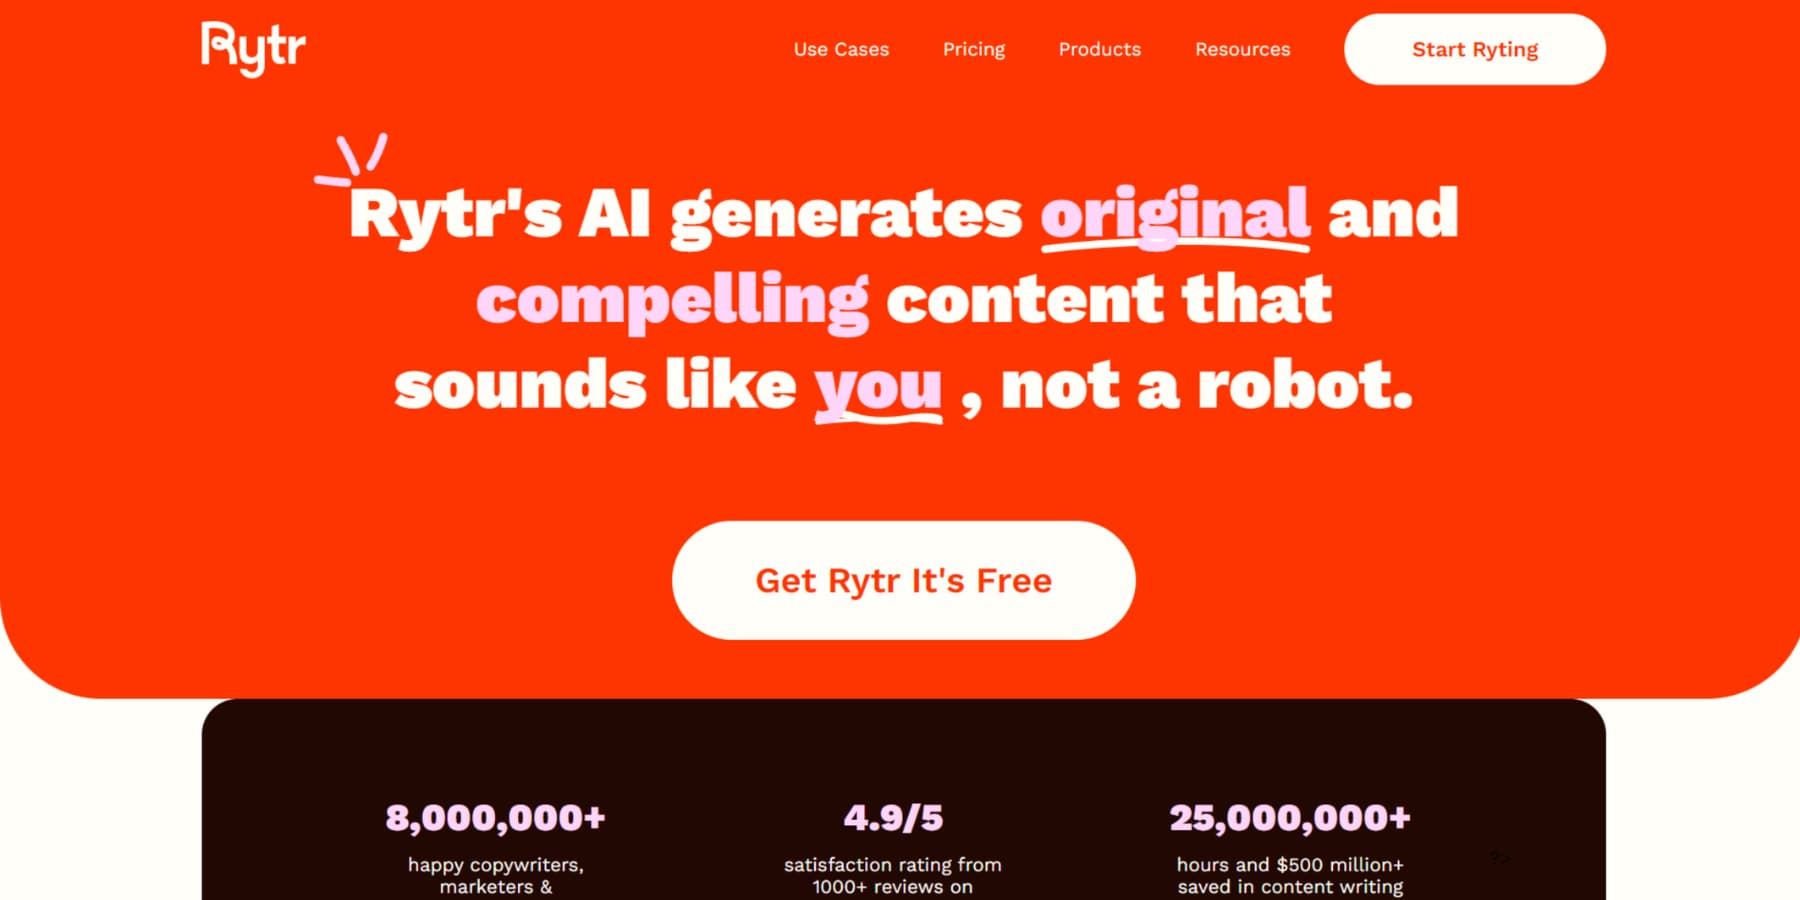 A screenshot of Rytr's home page